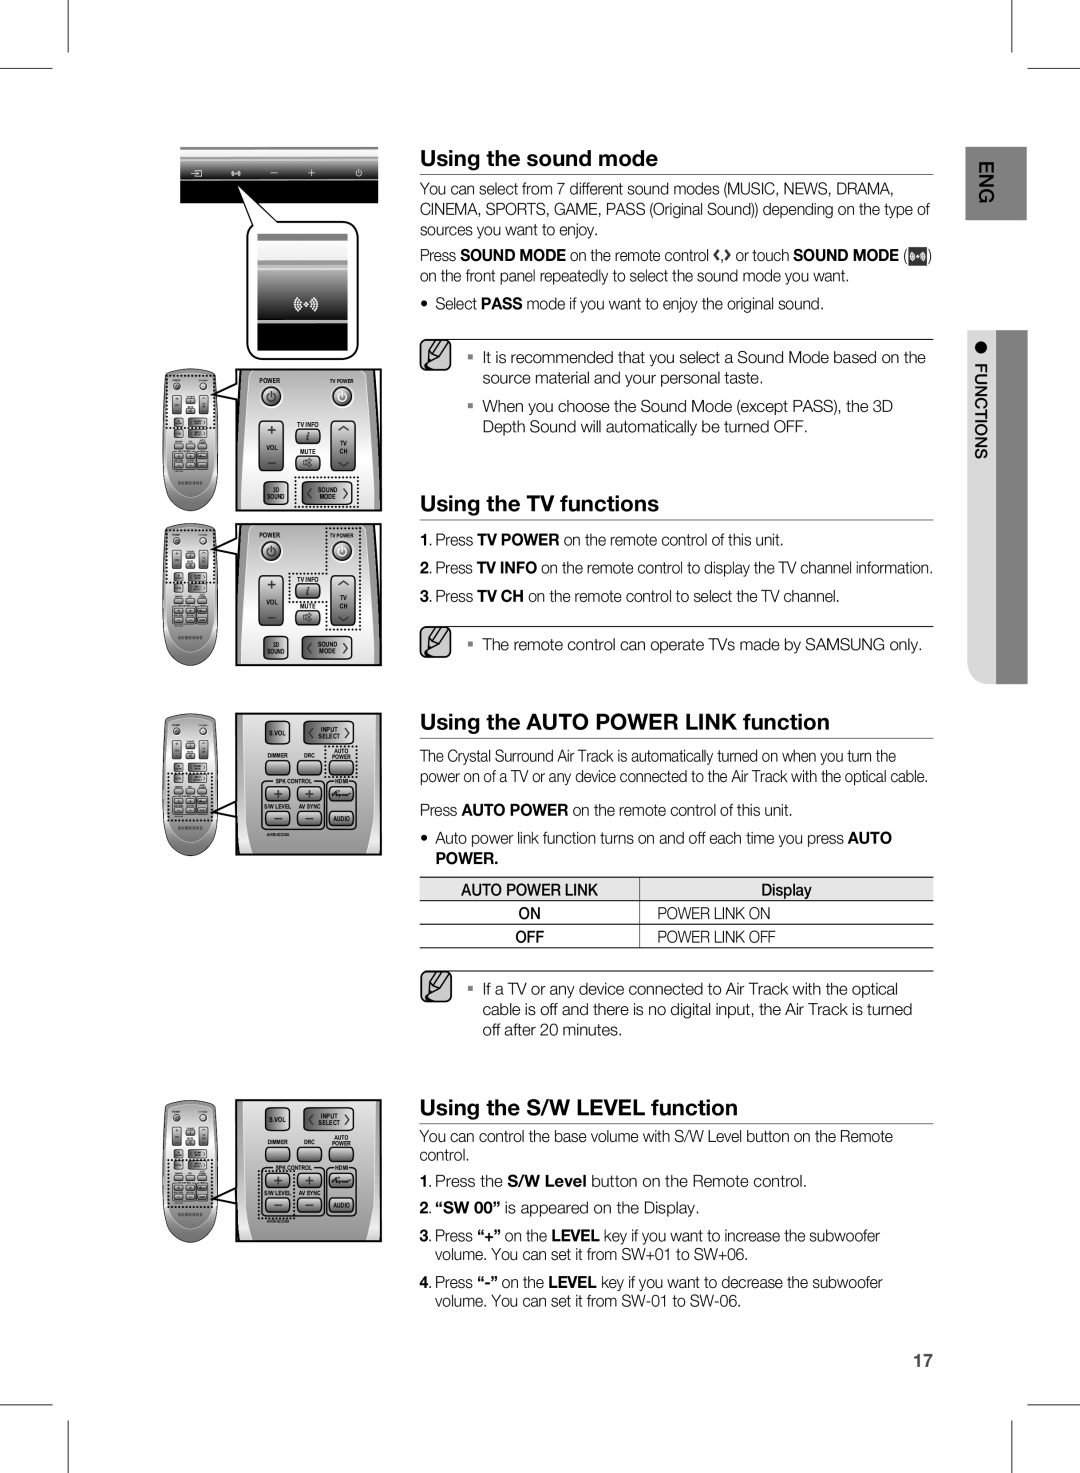 Samsung HW-D451, HW-D450 user manual Using the sound mode, Using the TV functions, Using the AUTO POWER LINK function, Power 